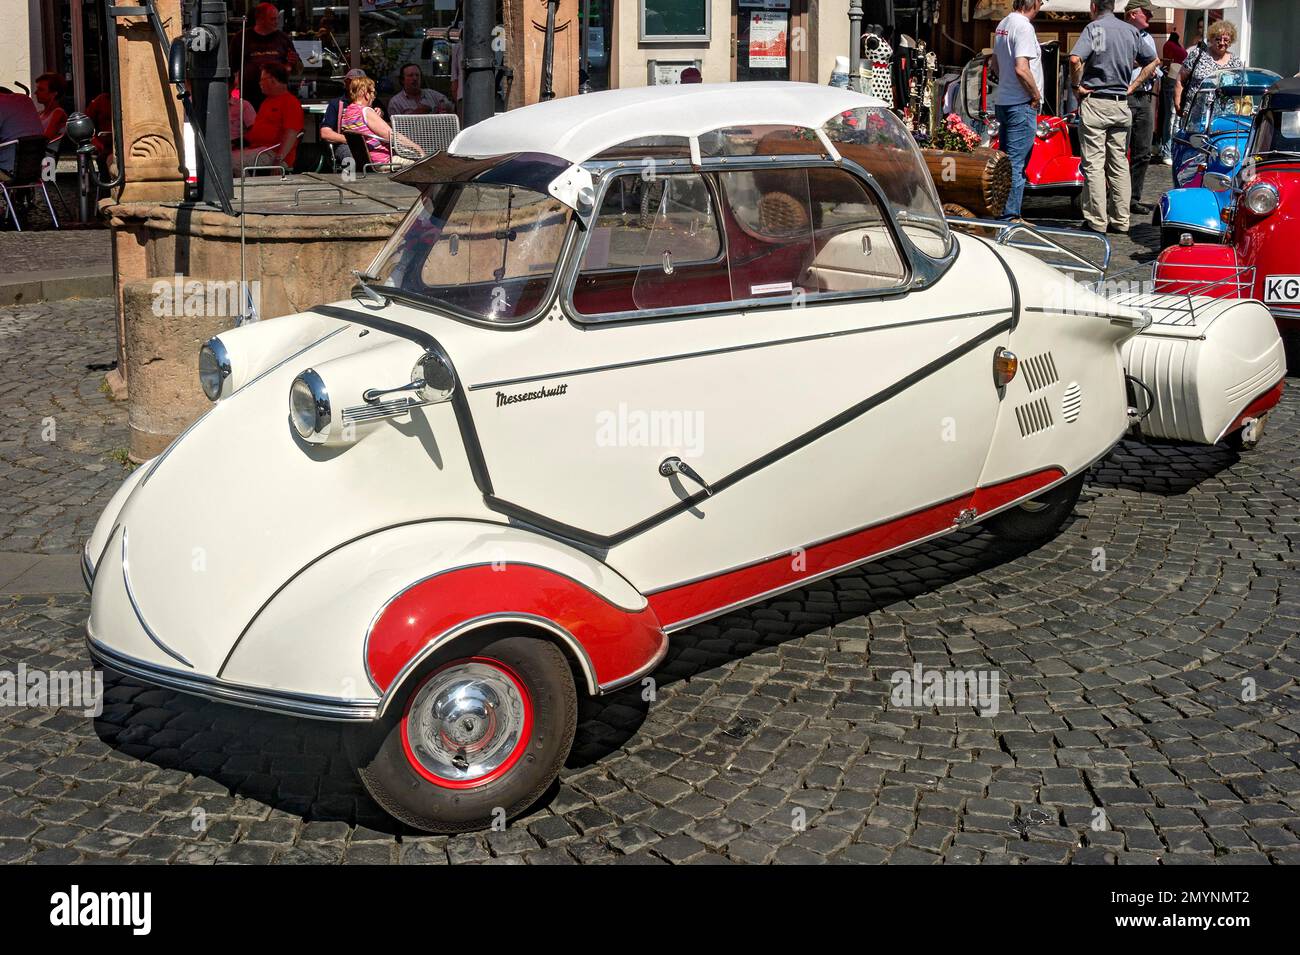 Vintage Messerschmitt cabin scooter KR 200 with glass roof, sunshade and trailer, built 1955 to 1964, market place, Nidda, Hesse, Germany, Europe Stock Photo